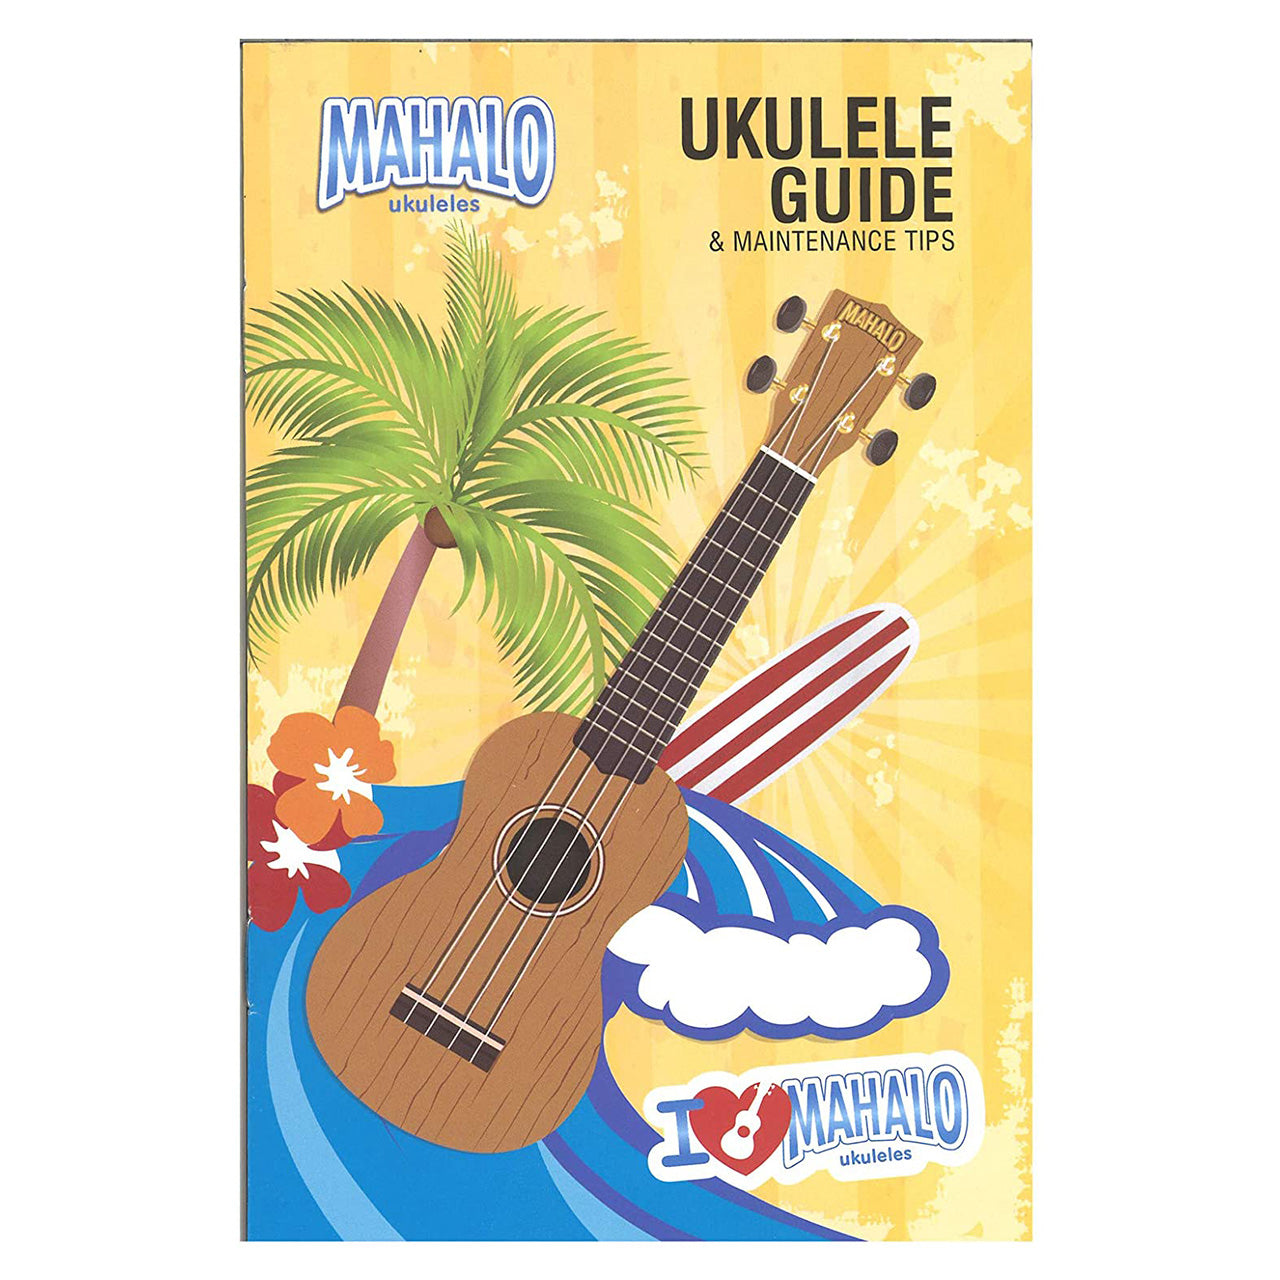 Mahalo Ukulele Introductory Essential Kit Accessory Pack (Electronic Clip On Tuner, Aquila Strings, 3 Picks) MZK1